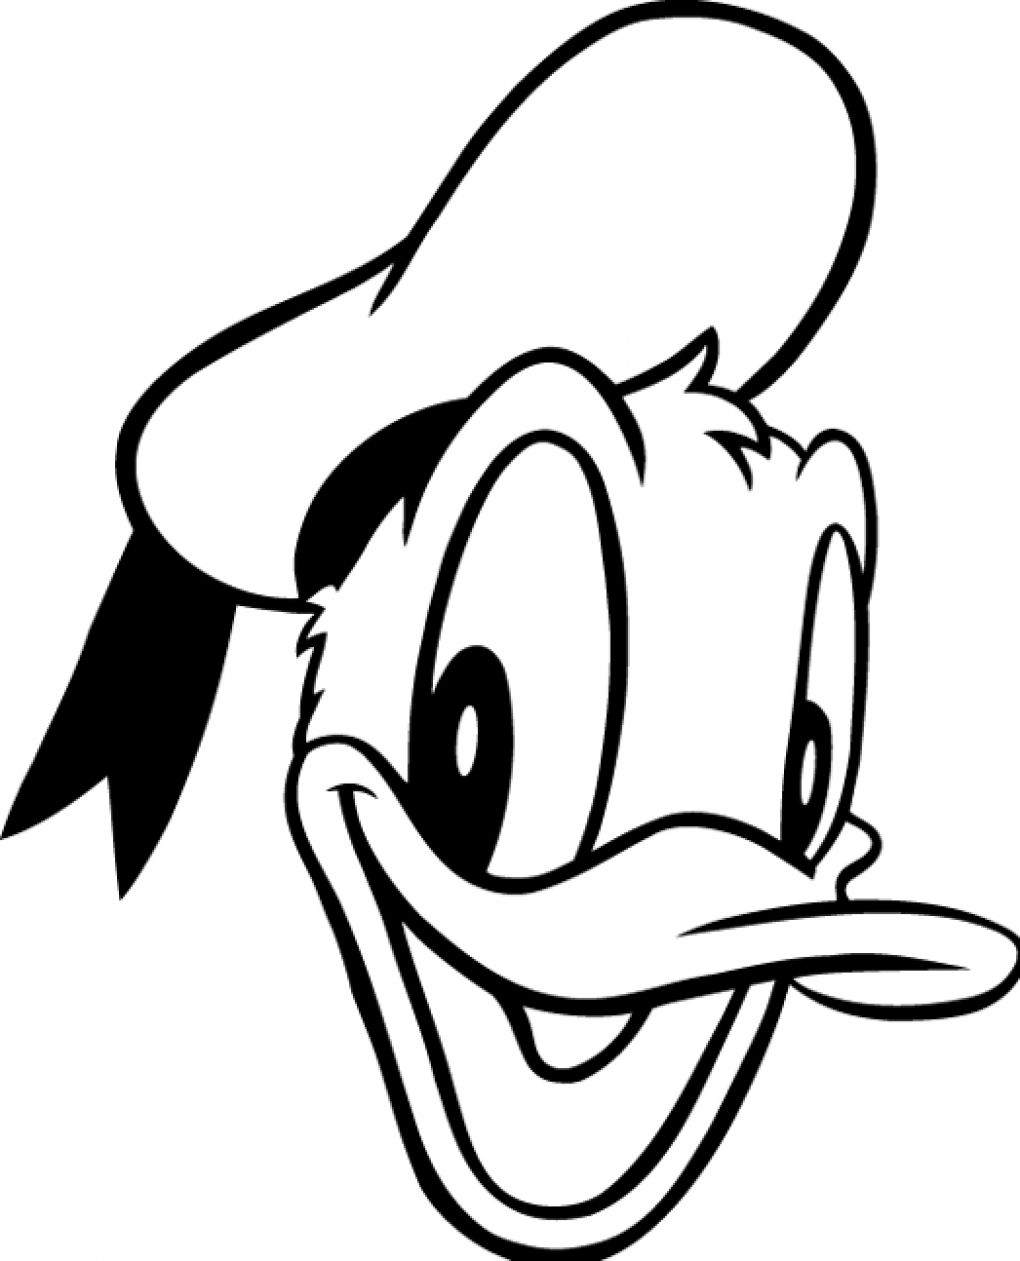 Outline Pic Of Faces Of Donald Duck - ClipArt Best